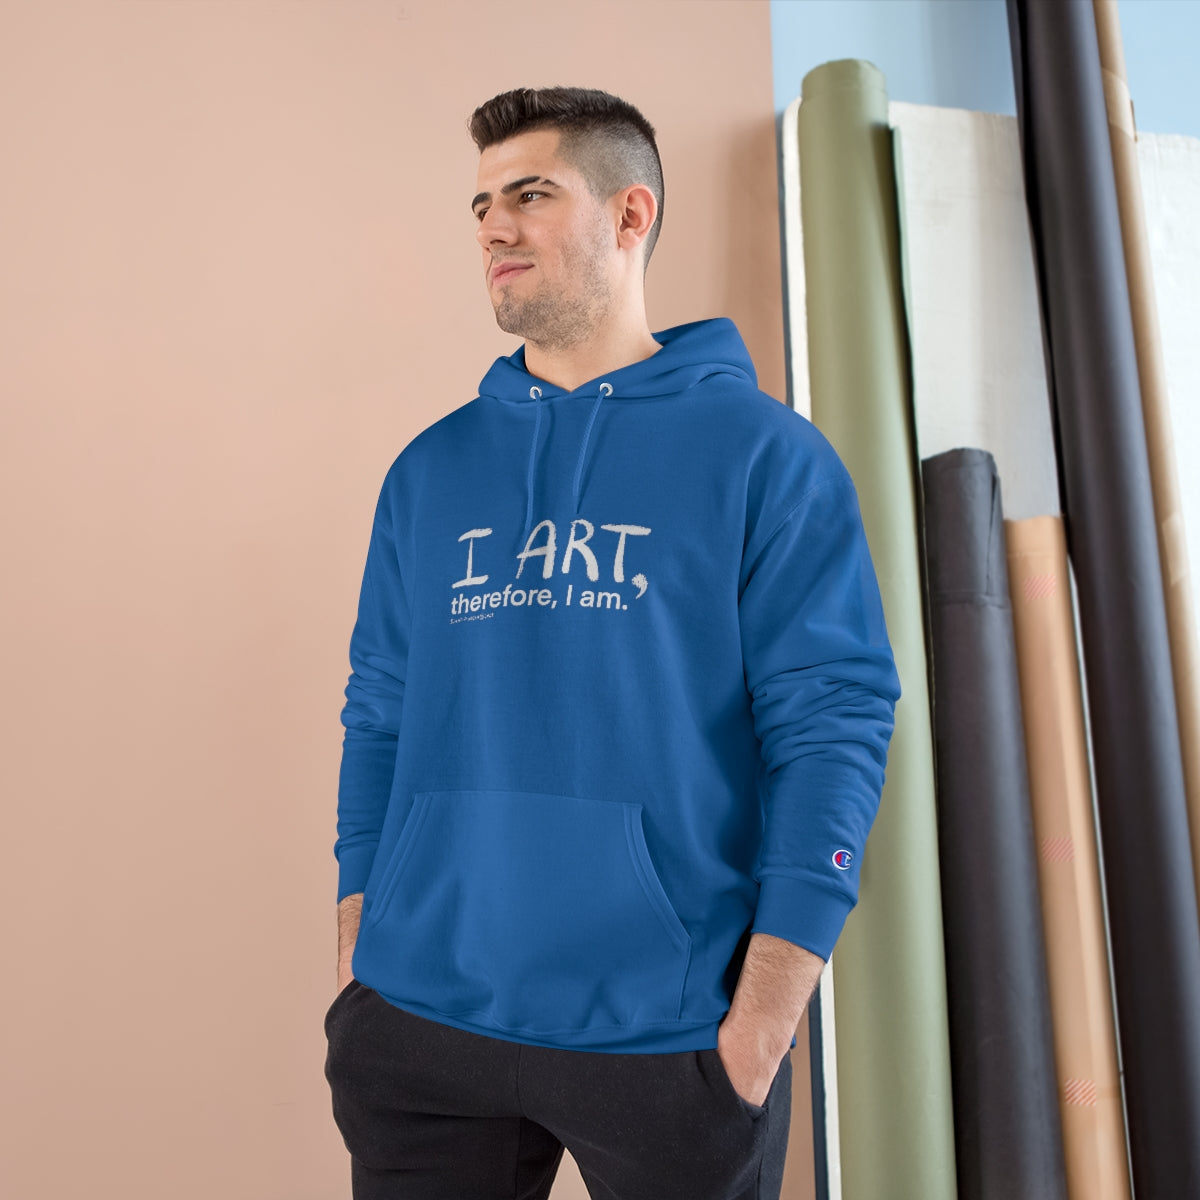 "I art, therefore, I am" Design - Champion Hoodie